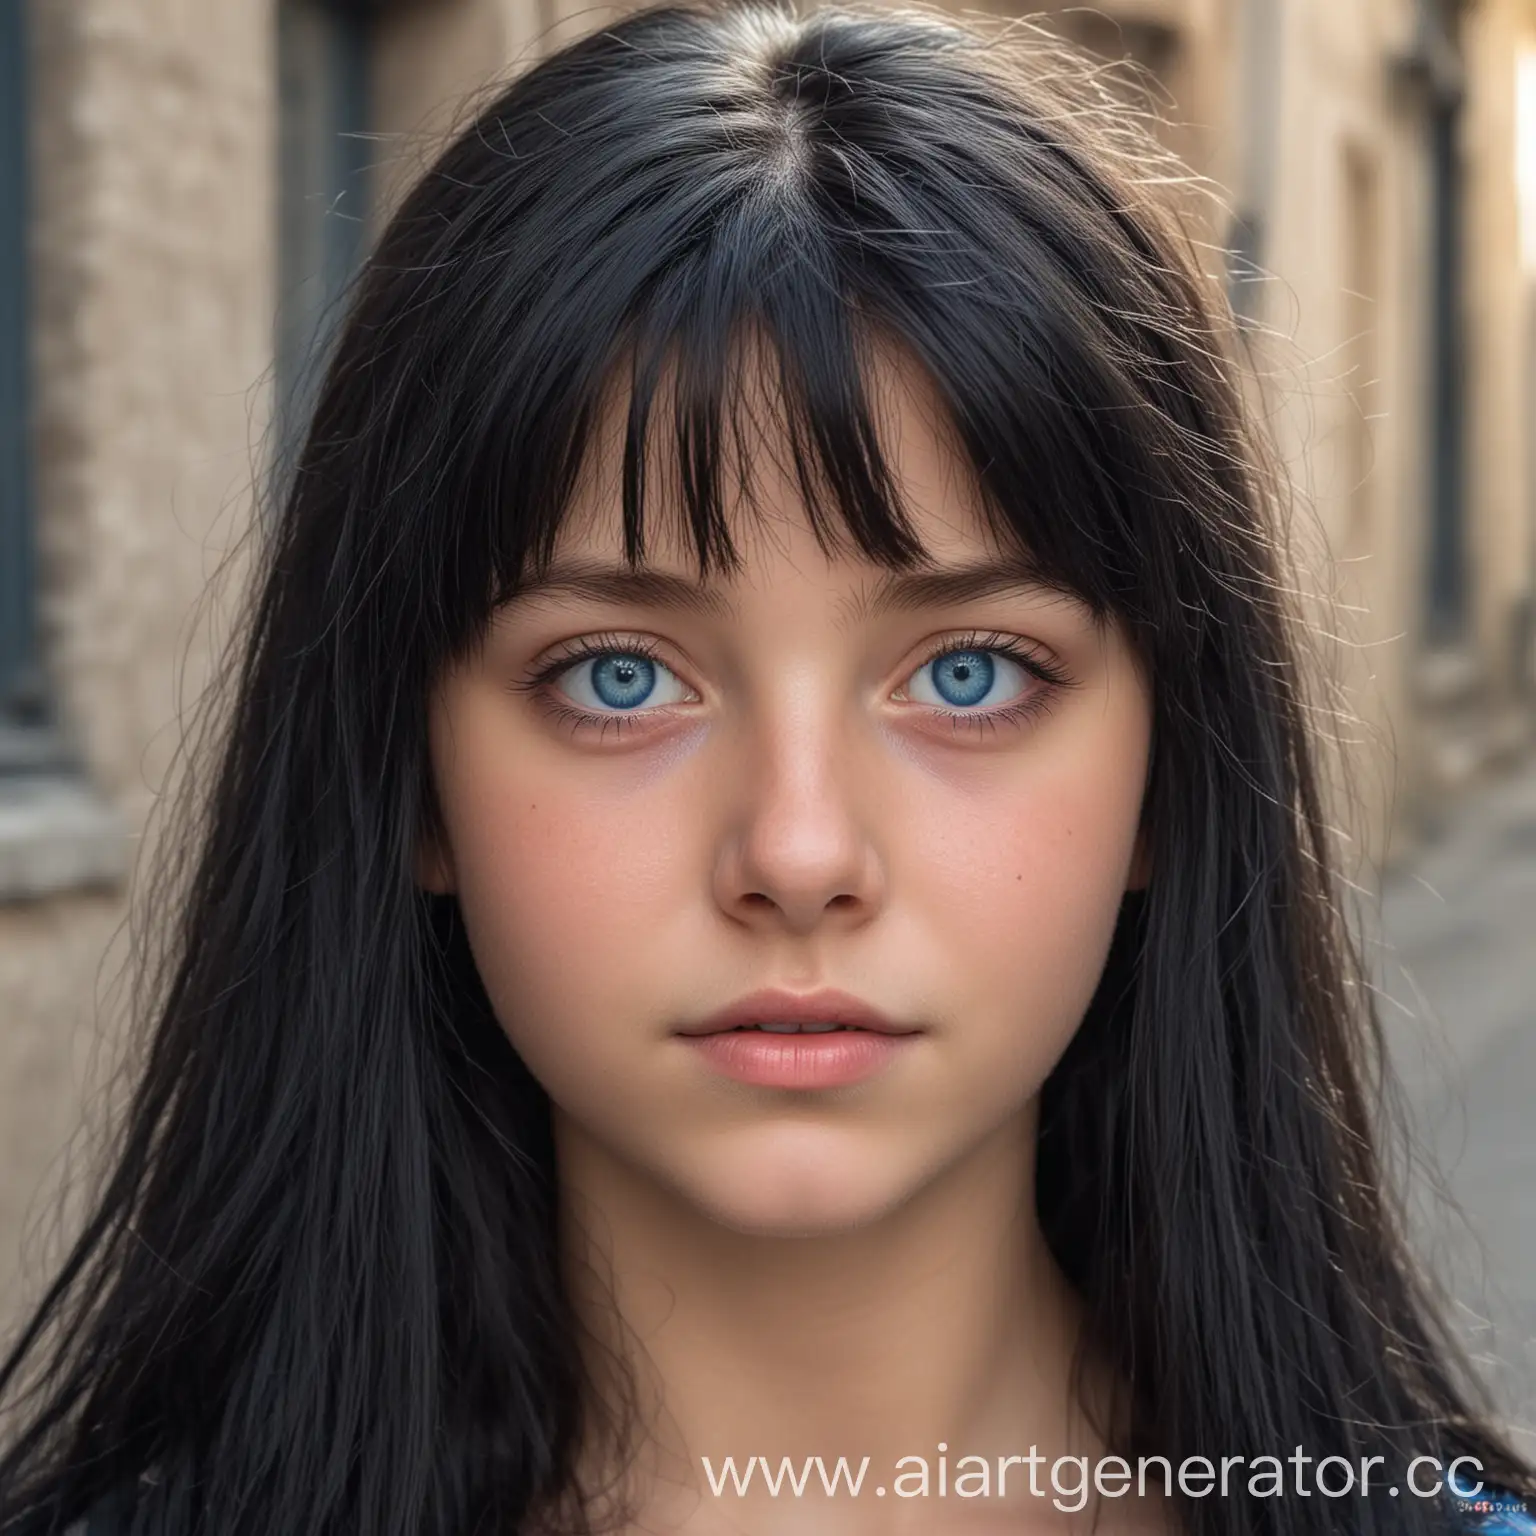 Teenage-Girl-with-Black-Hair-and-Blue-Eyes-in-Urban-Setting